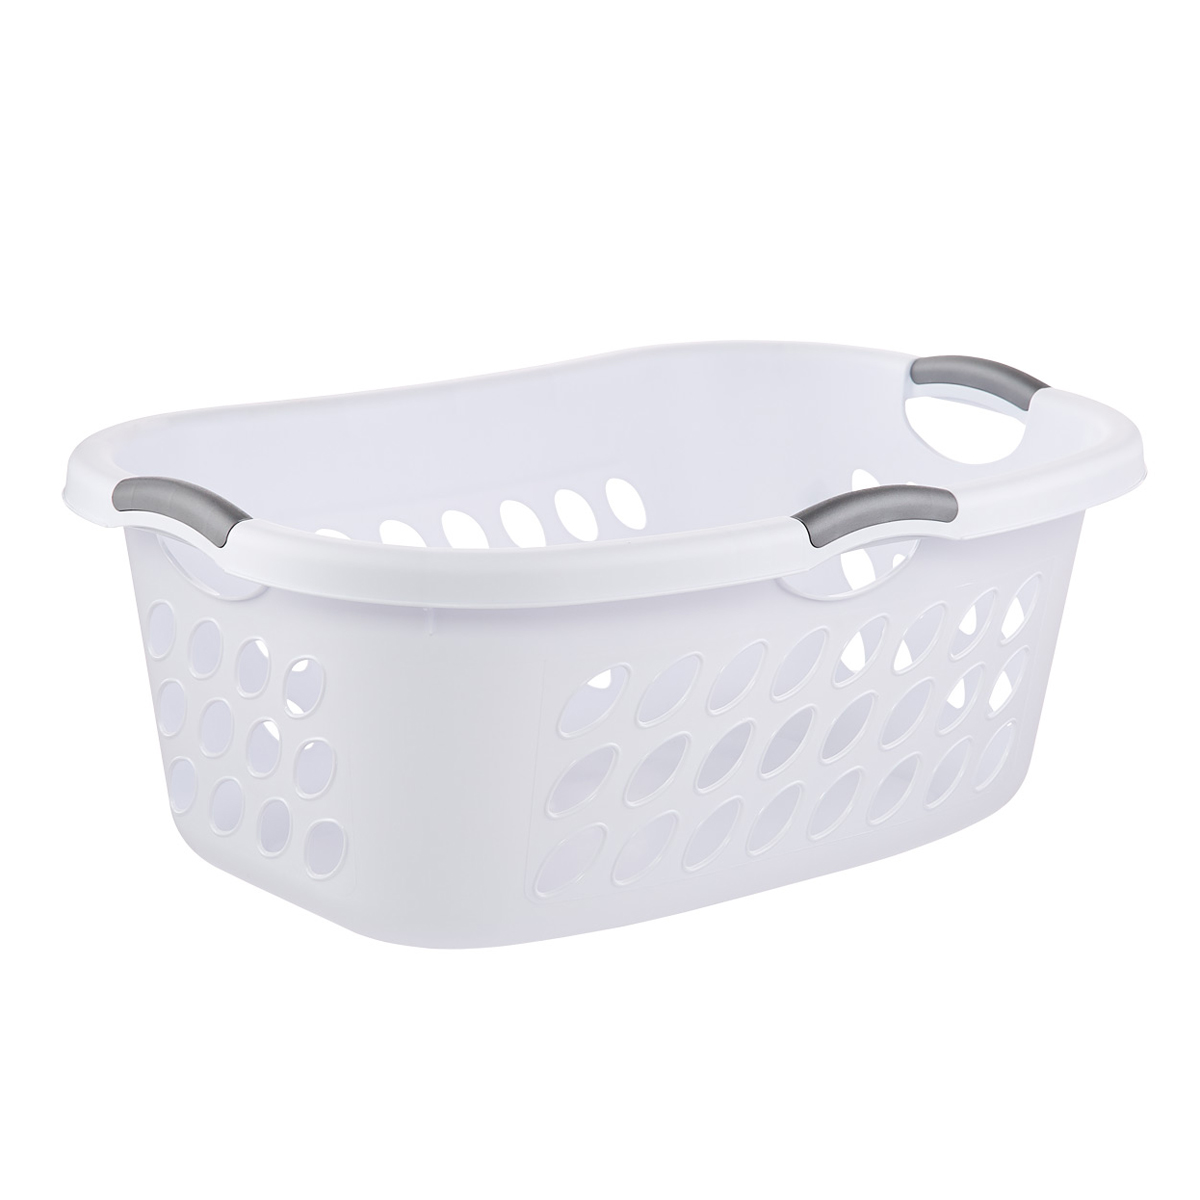 https://www.containerstore.com/catalogimages/410282/10084413_sterilite_ultra_hiphold_lau.jpg